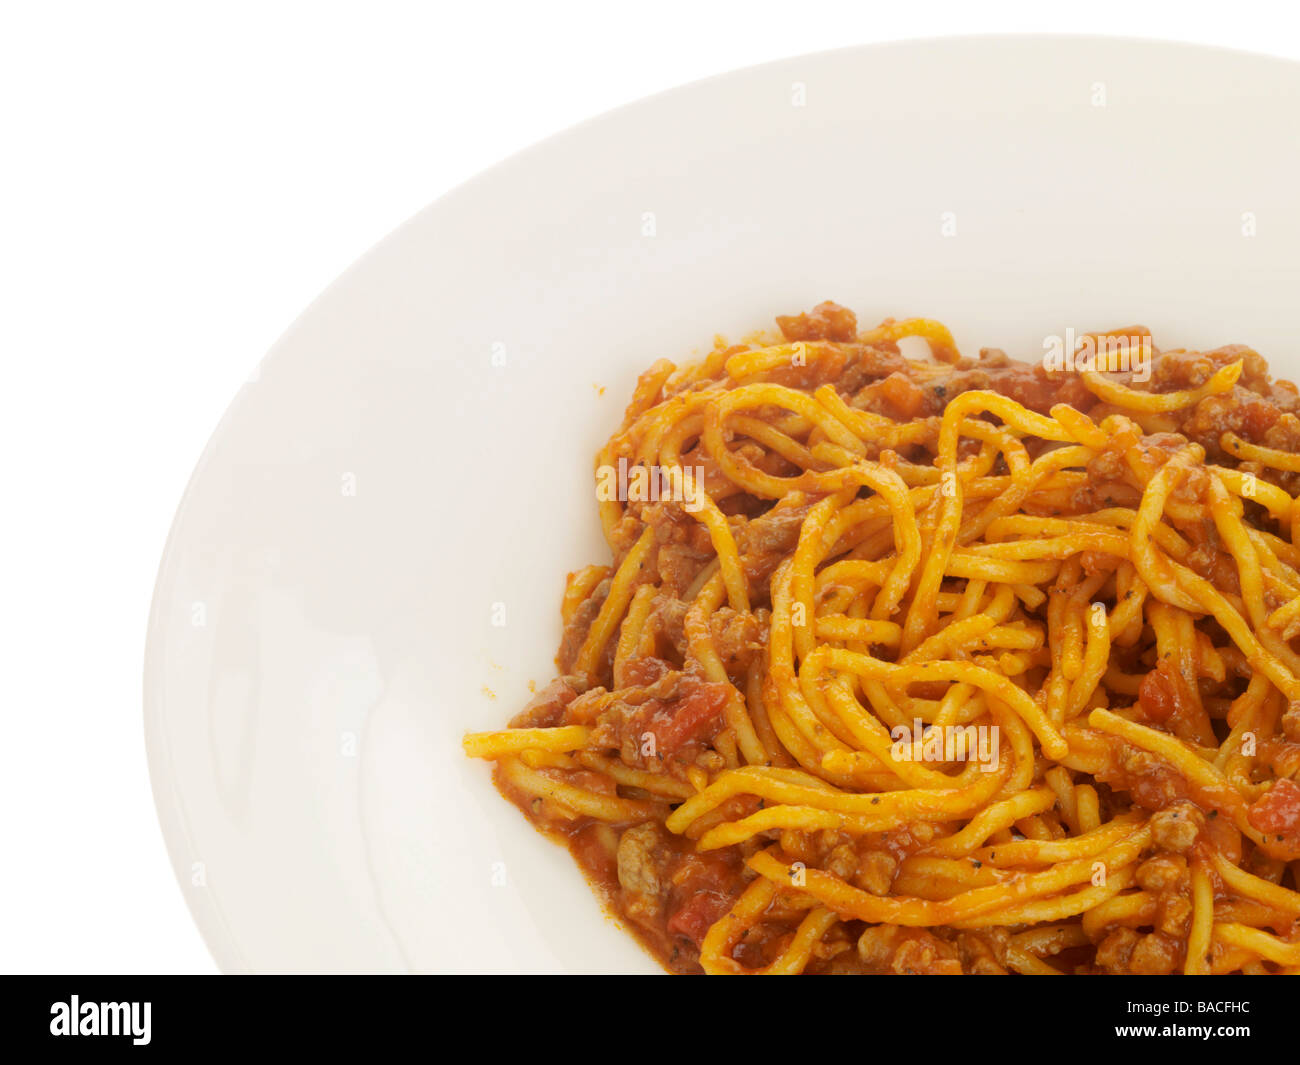 Authentic Traditional Italian Style Spaghetti Bolognese Pasta Meal Isolated Against A White Background With No People And A Clipping Path Stock Photo